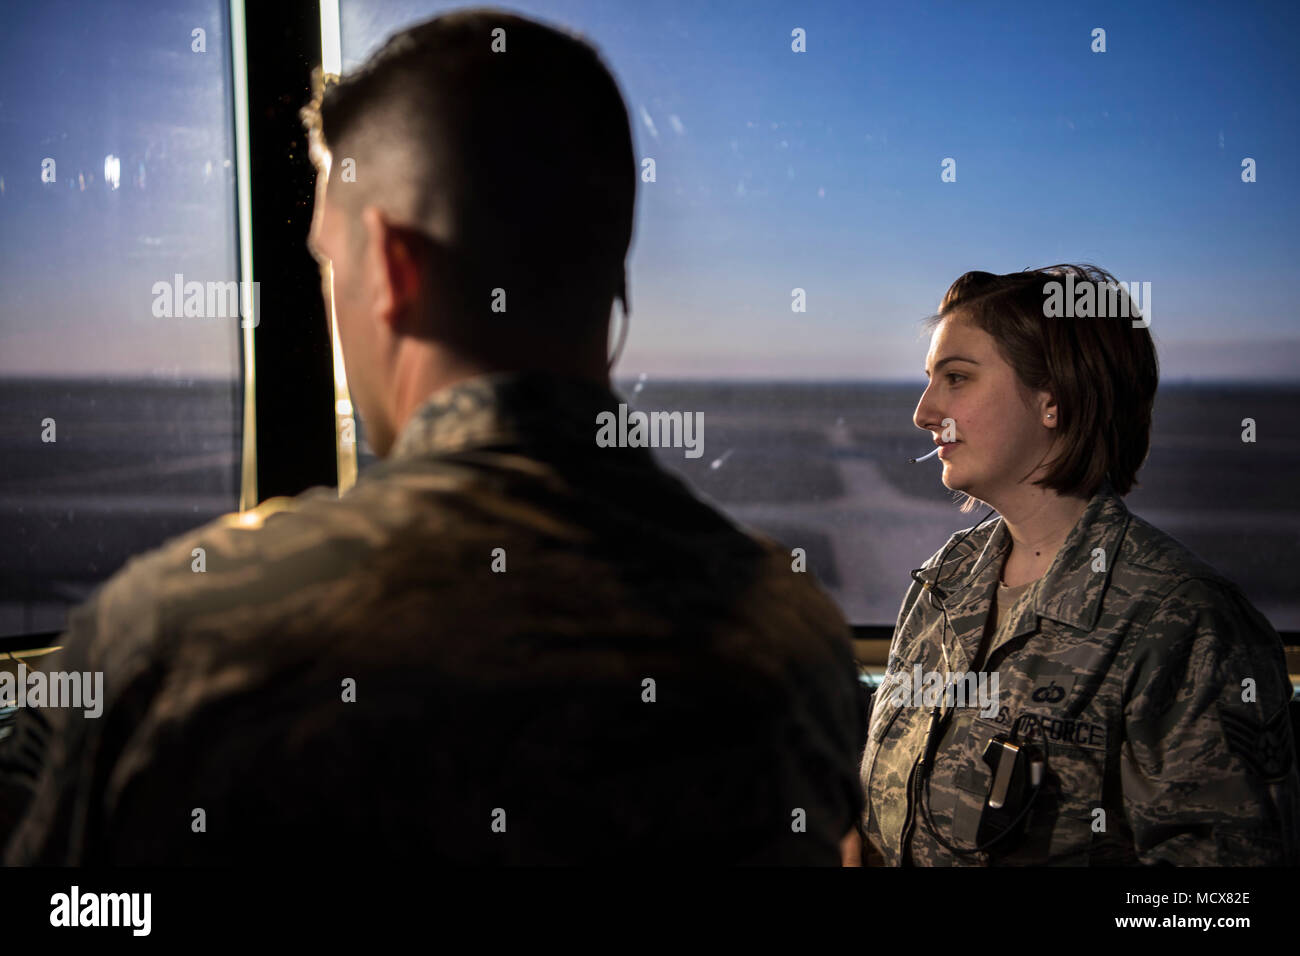 Vance air traffic controllers manage the airspace from Inhofe Air Traffic Control Tower, March 1, 2017, at Vance Air Force Base, Okla. Although Vance may be known as a pilot training base, it's also one of the leaders in training and certifying Air Force air traffic controllers. (U.S. Air Force photo by Airman Zachary Heal) Stock Photo